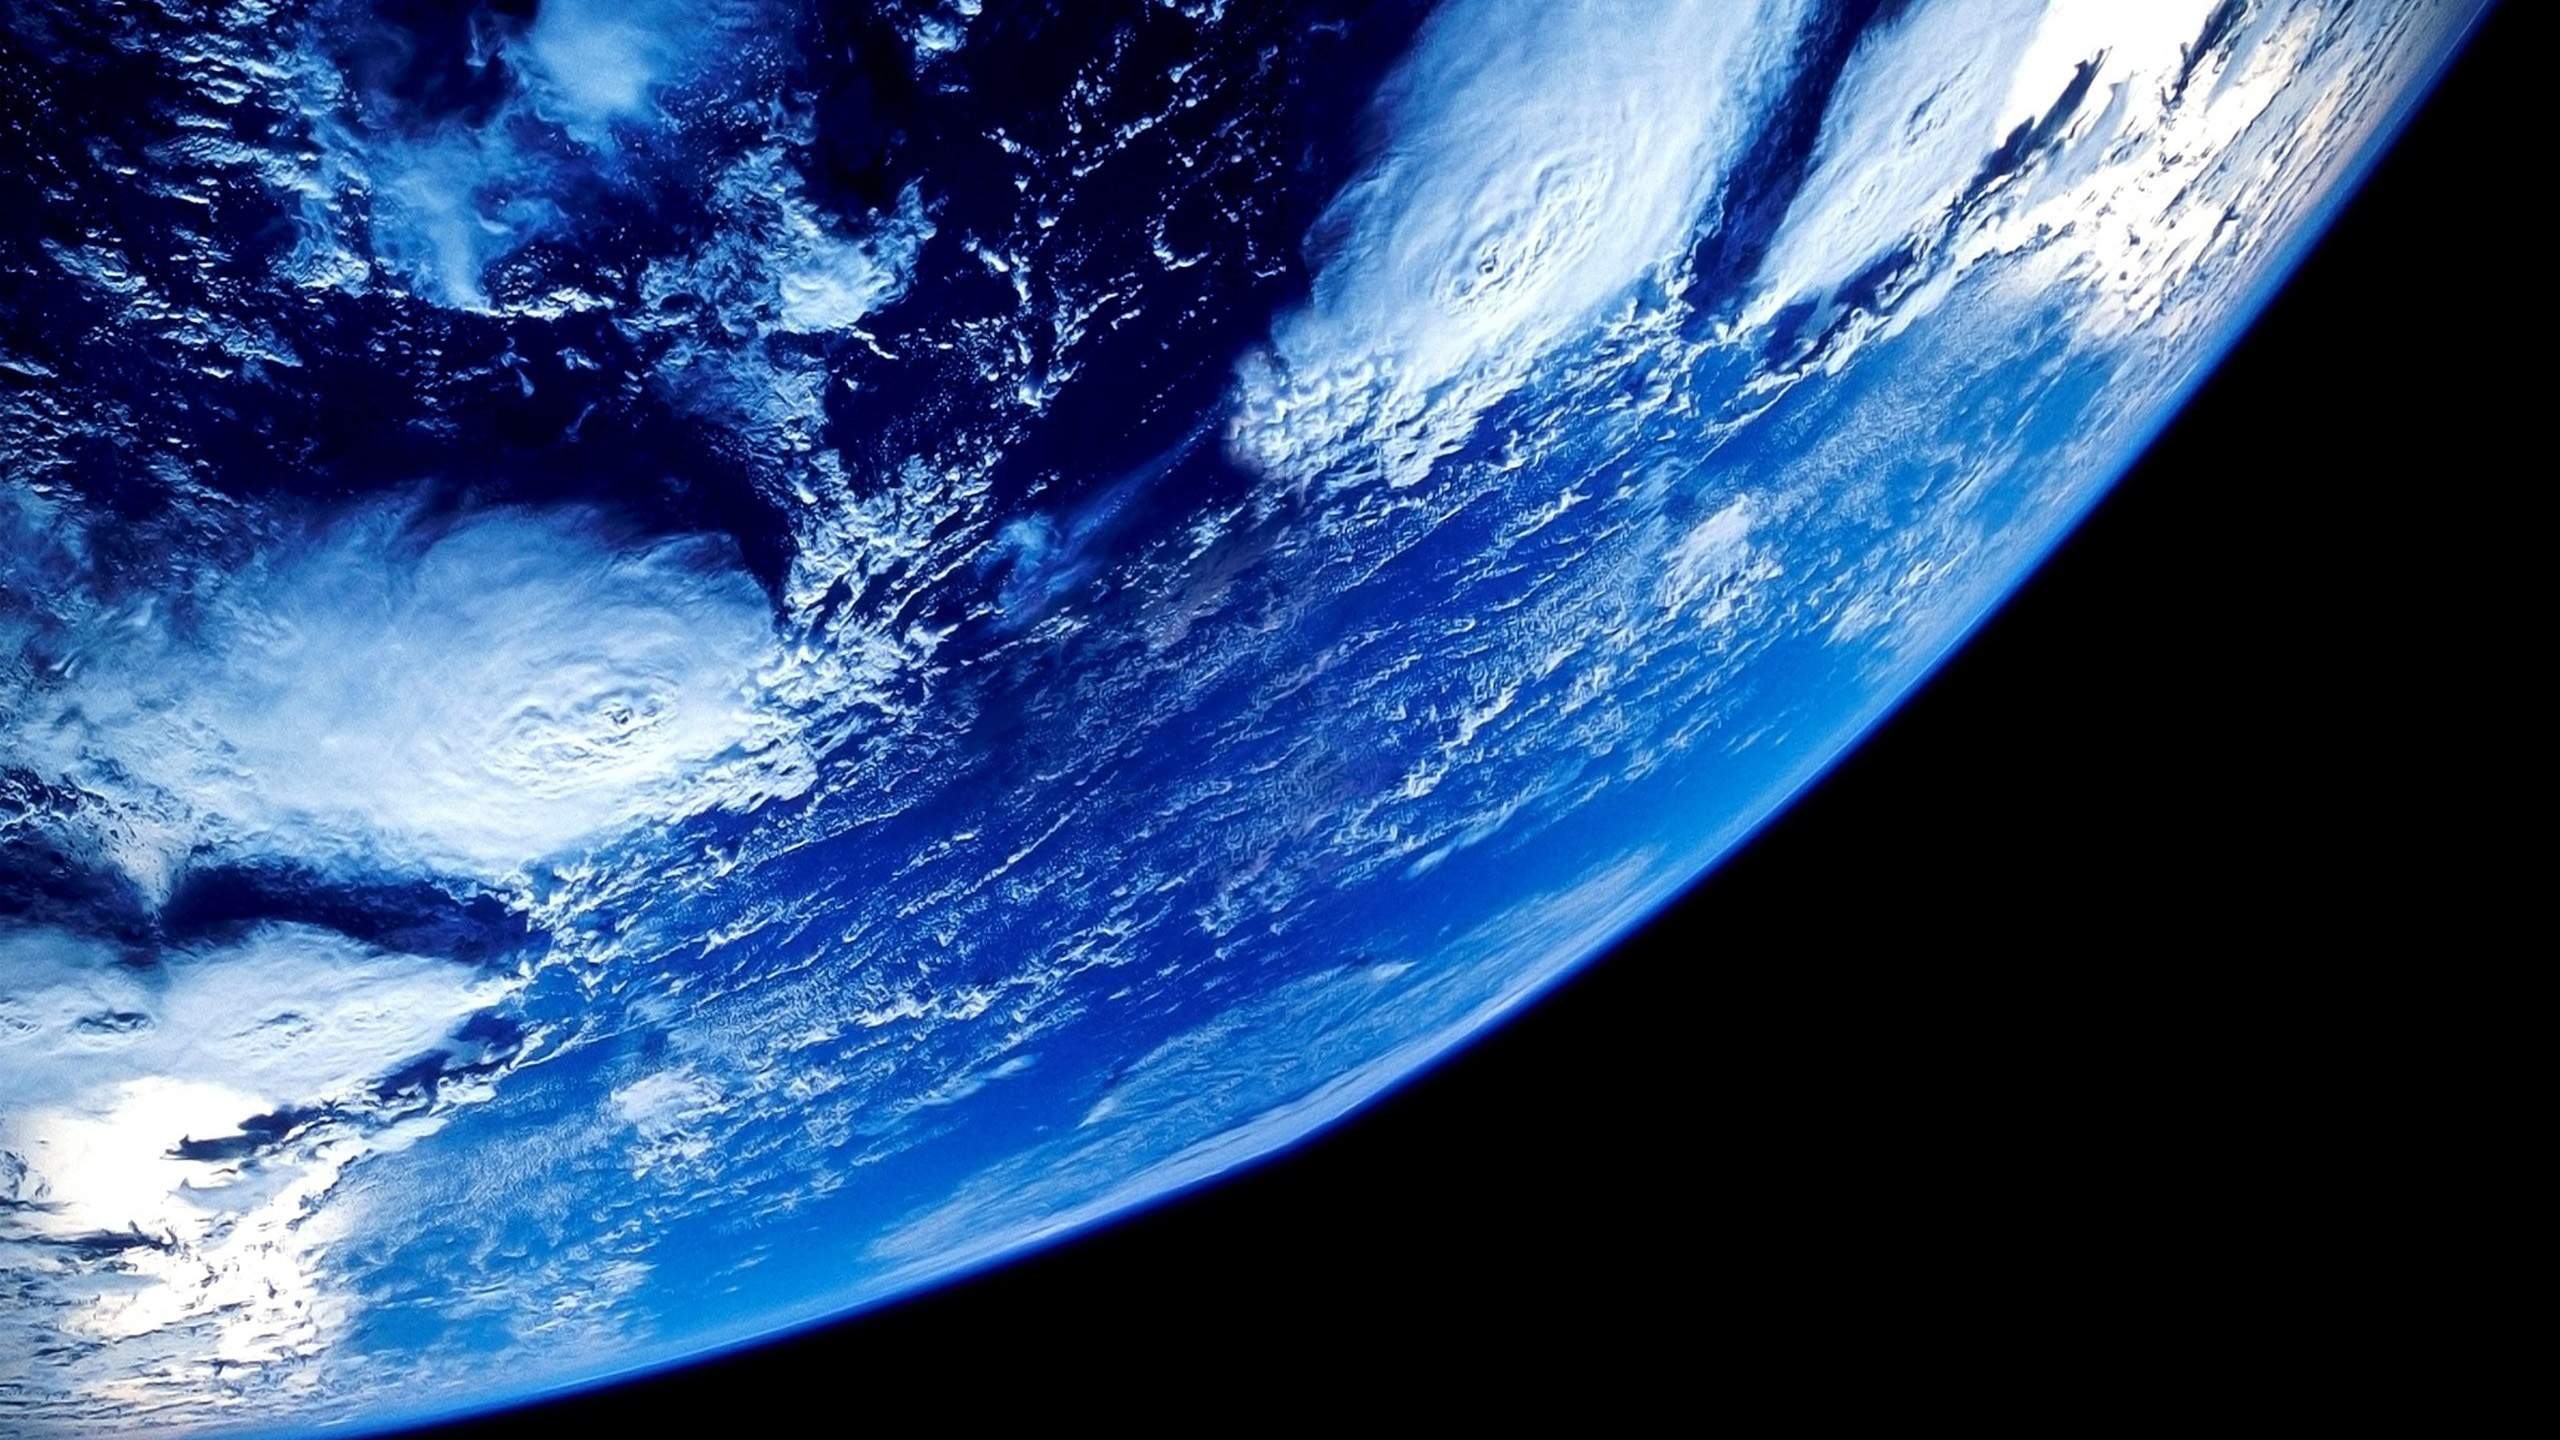 earth from space HD 16212 2560x1440 -download High Resolution